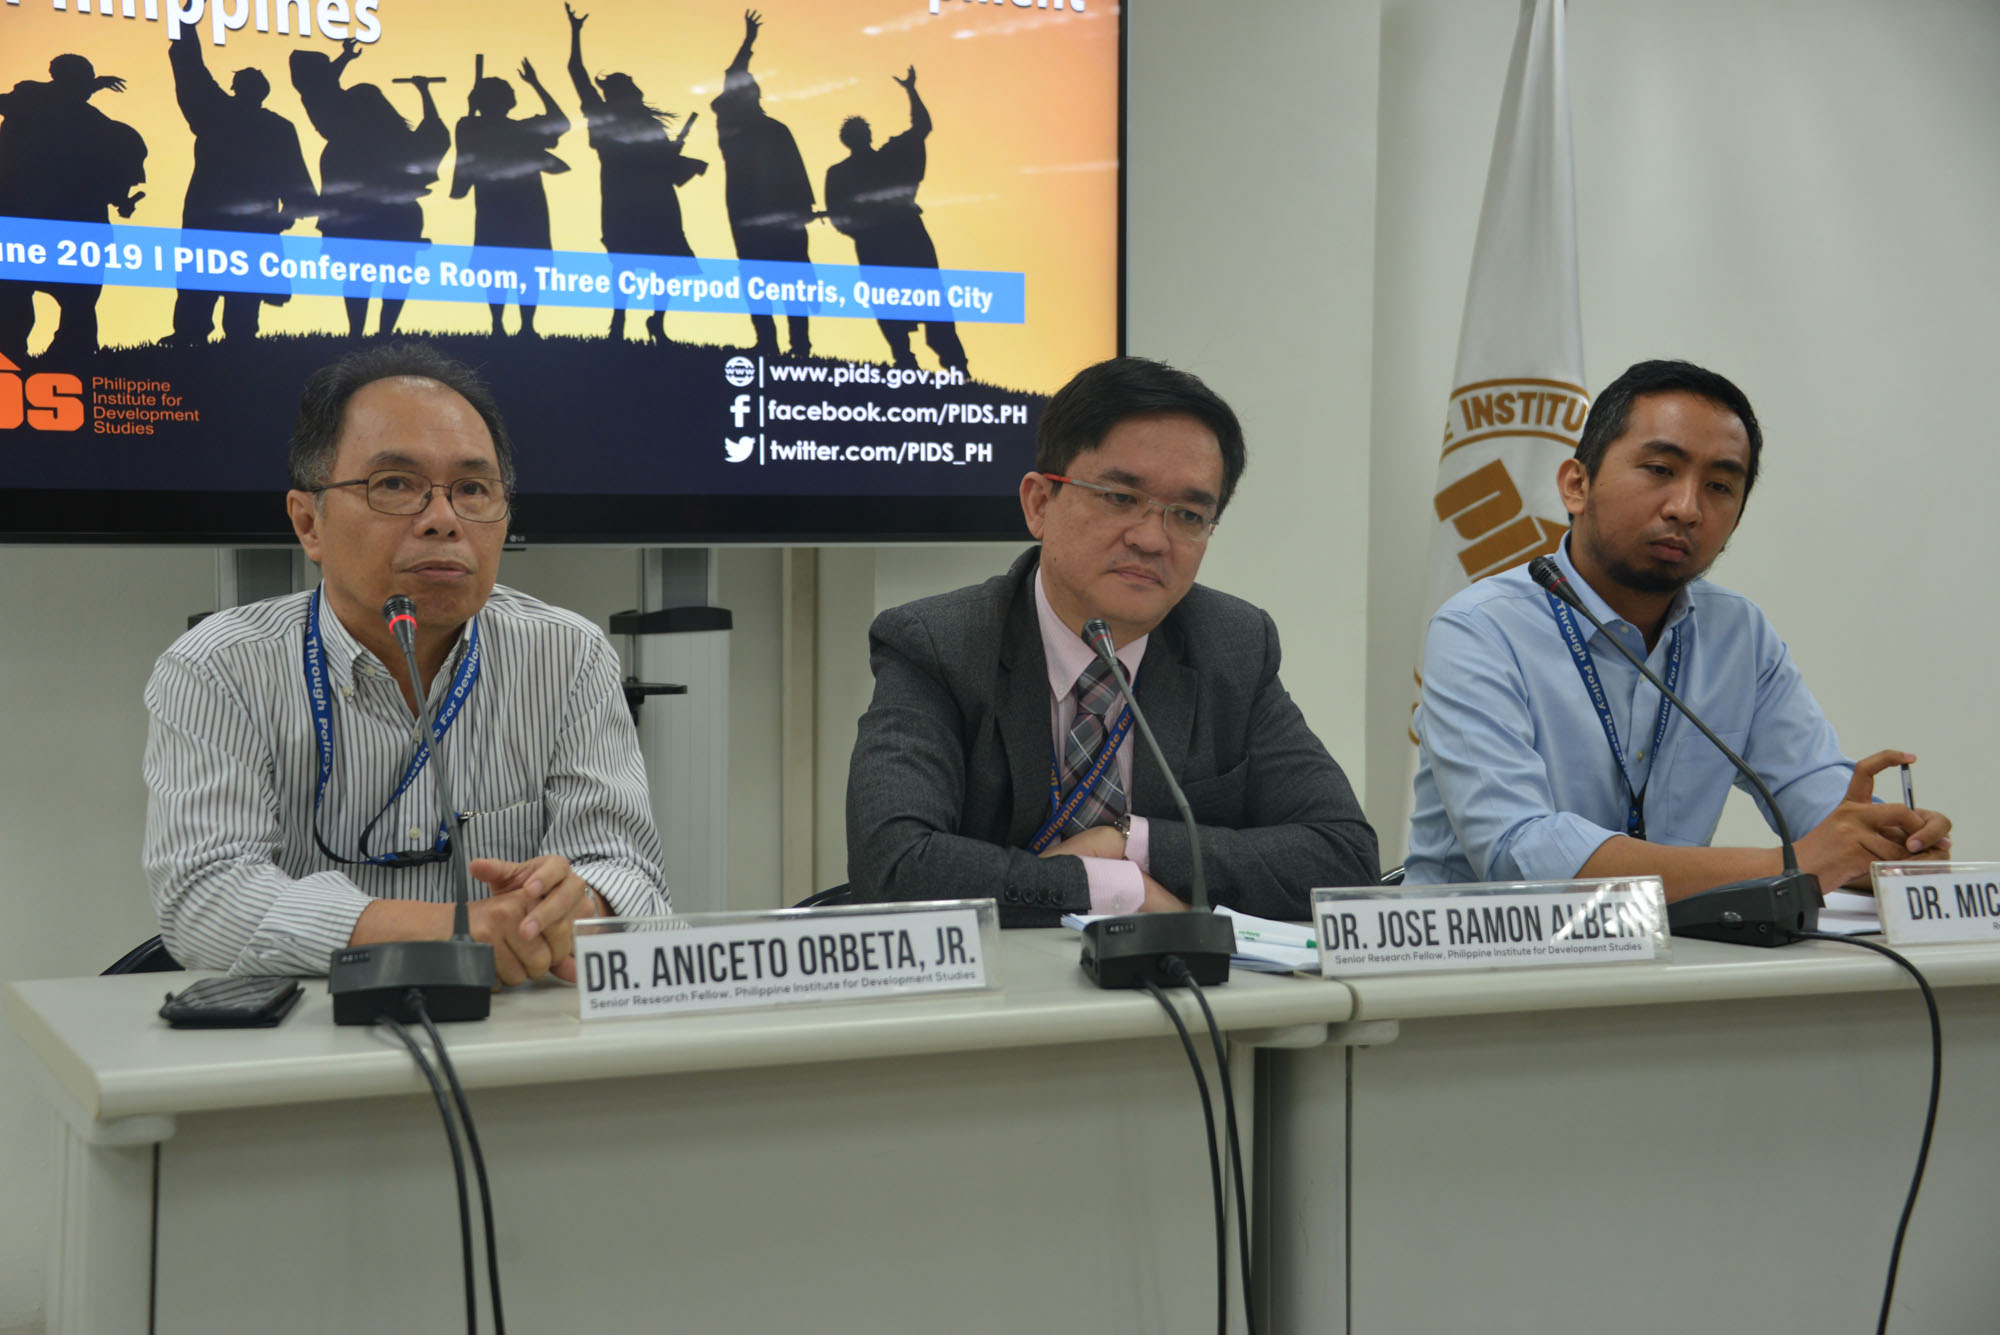 Public Seminar on Education and Human Capital Development in the Philippines-pids-educ-16-20190619.jpg